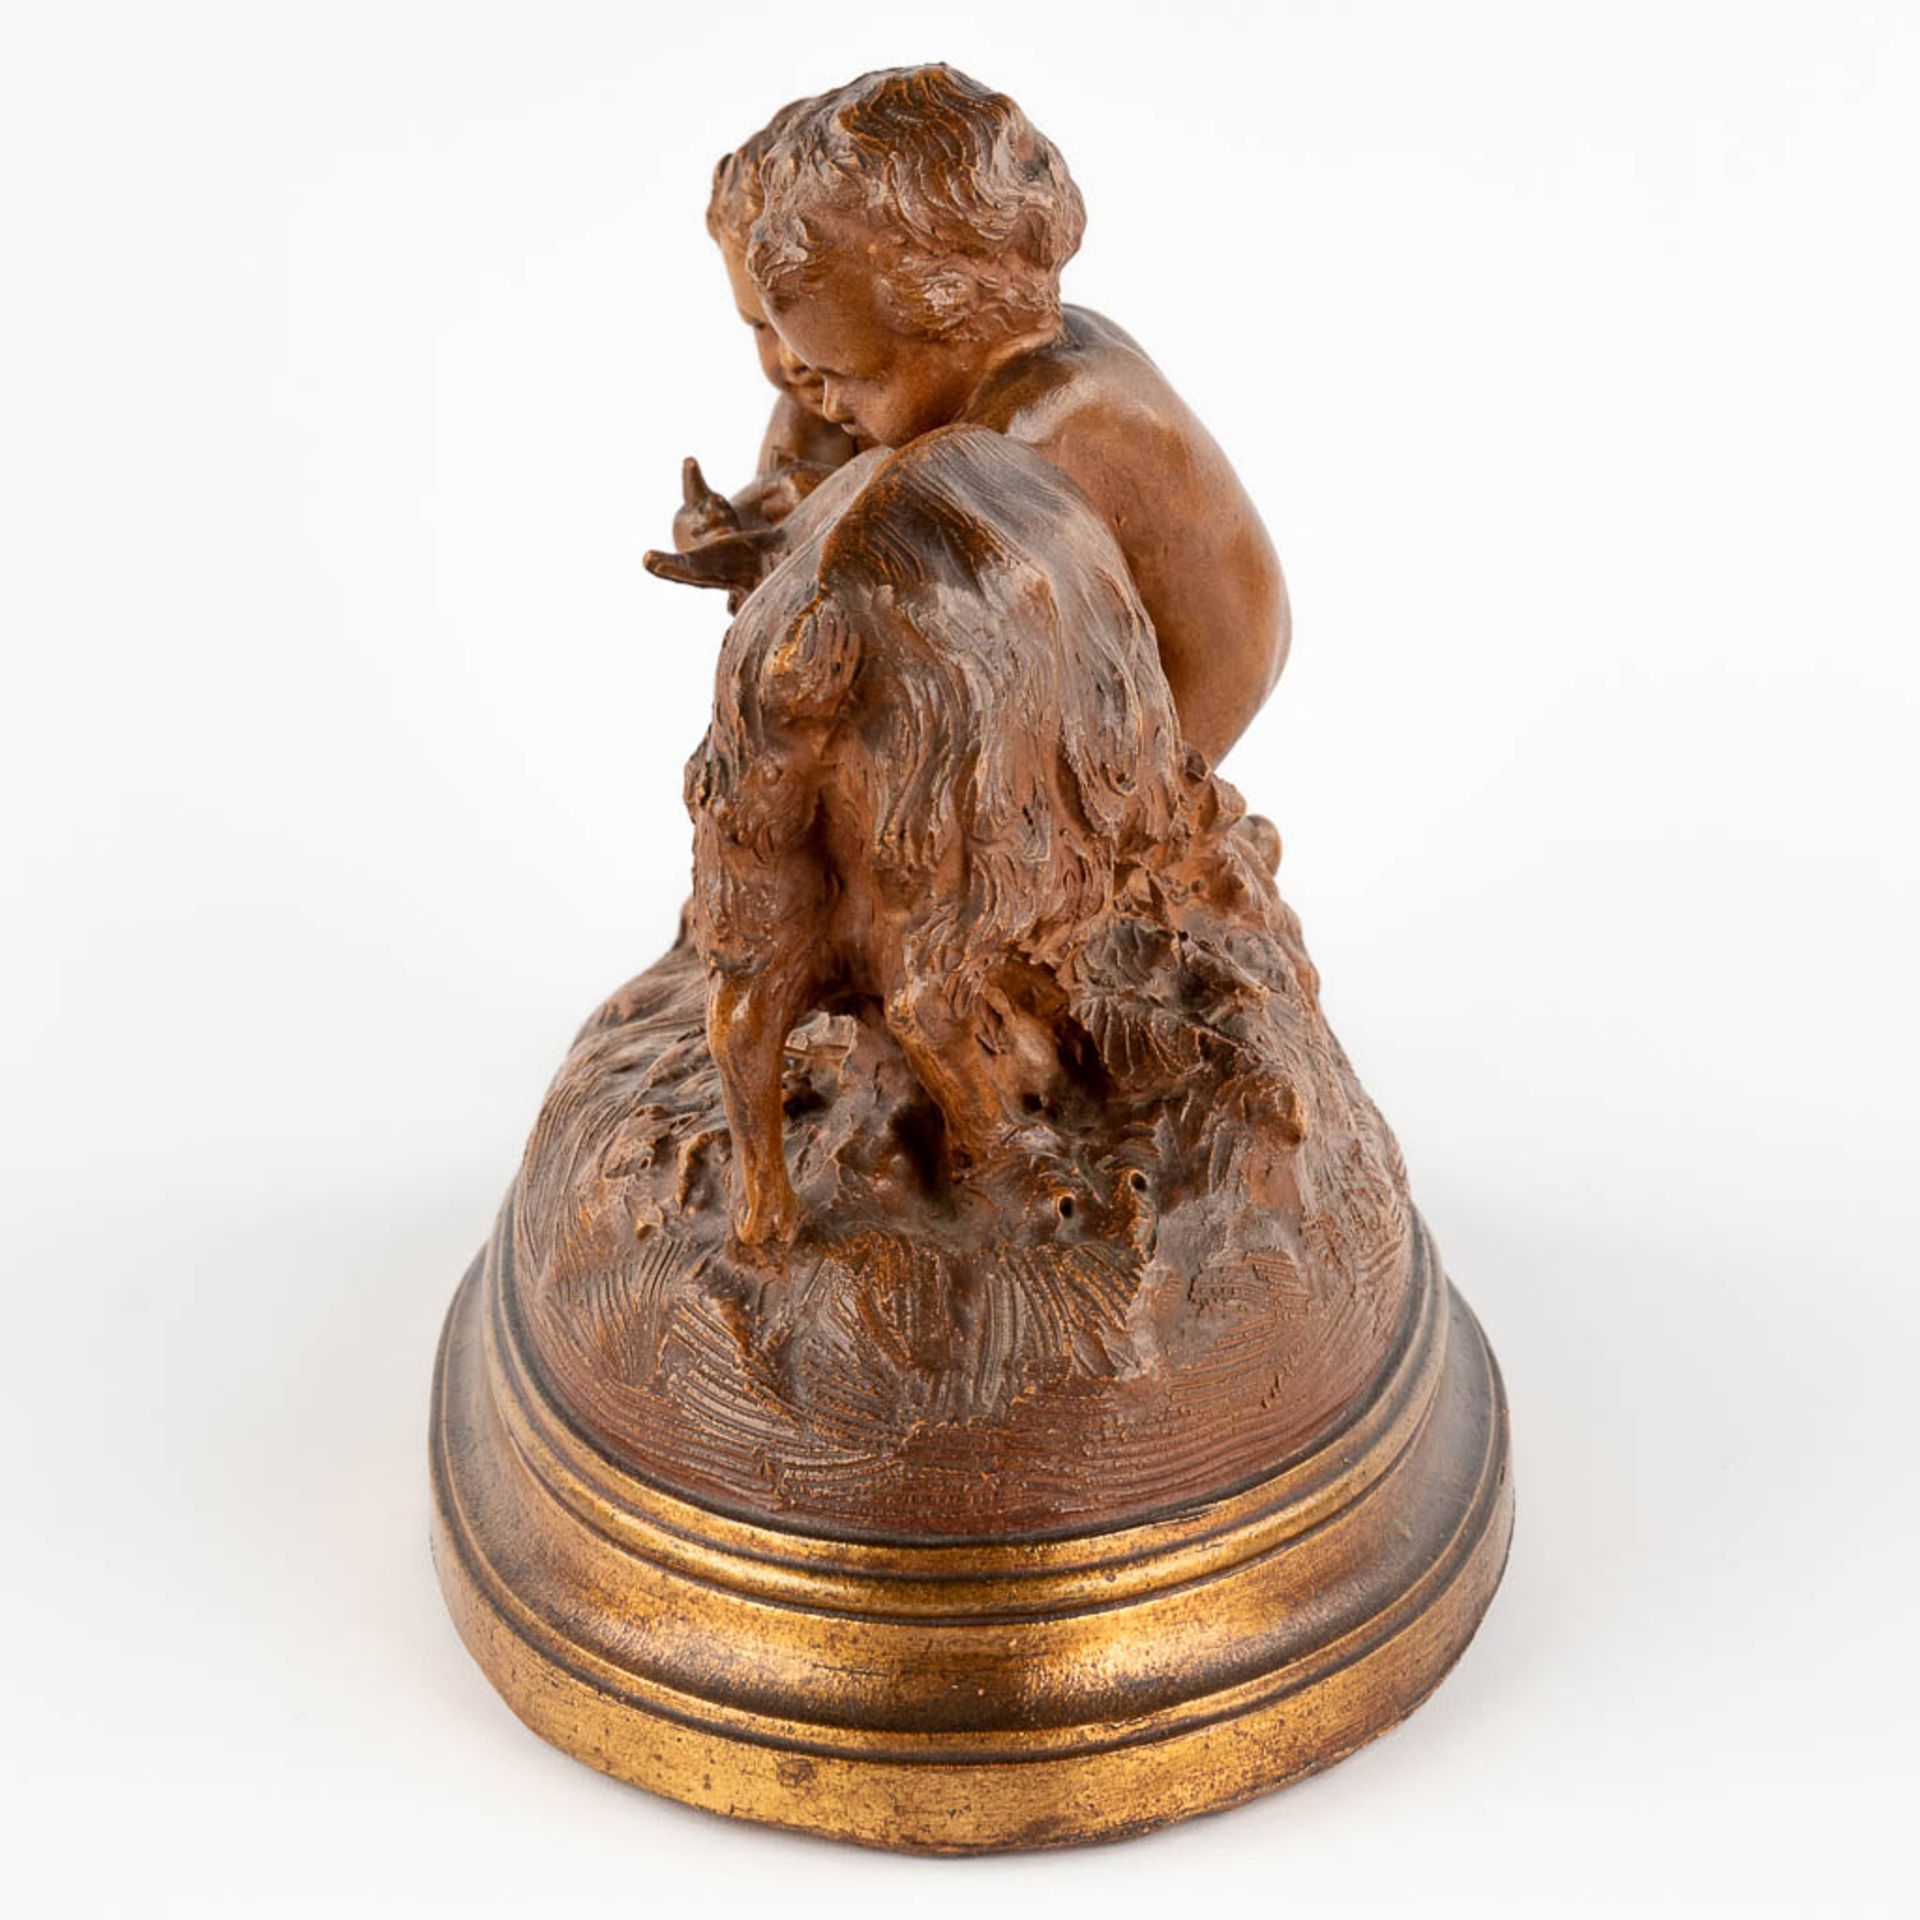 Giuseppe D'ASTE (1881-1945) 'Two satyrs with a goat' patinated terracotta. (L:22 x W:40 x H:28 cm) - Image 4 of 12